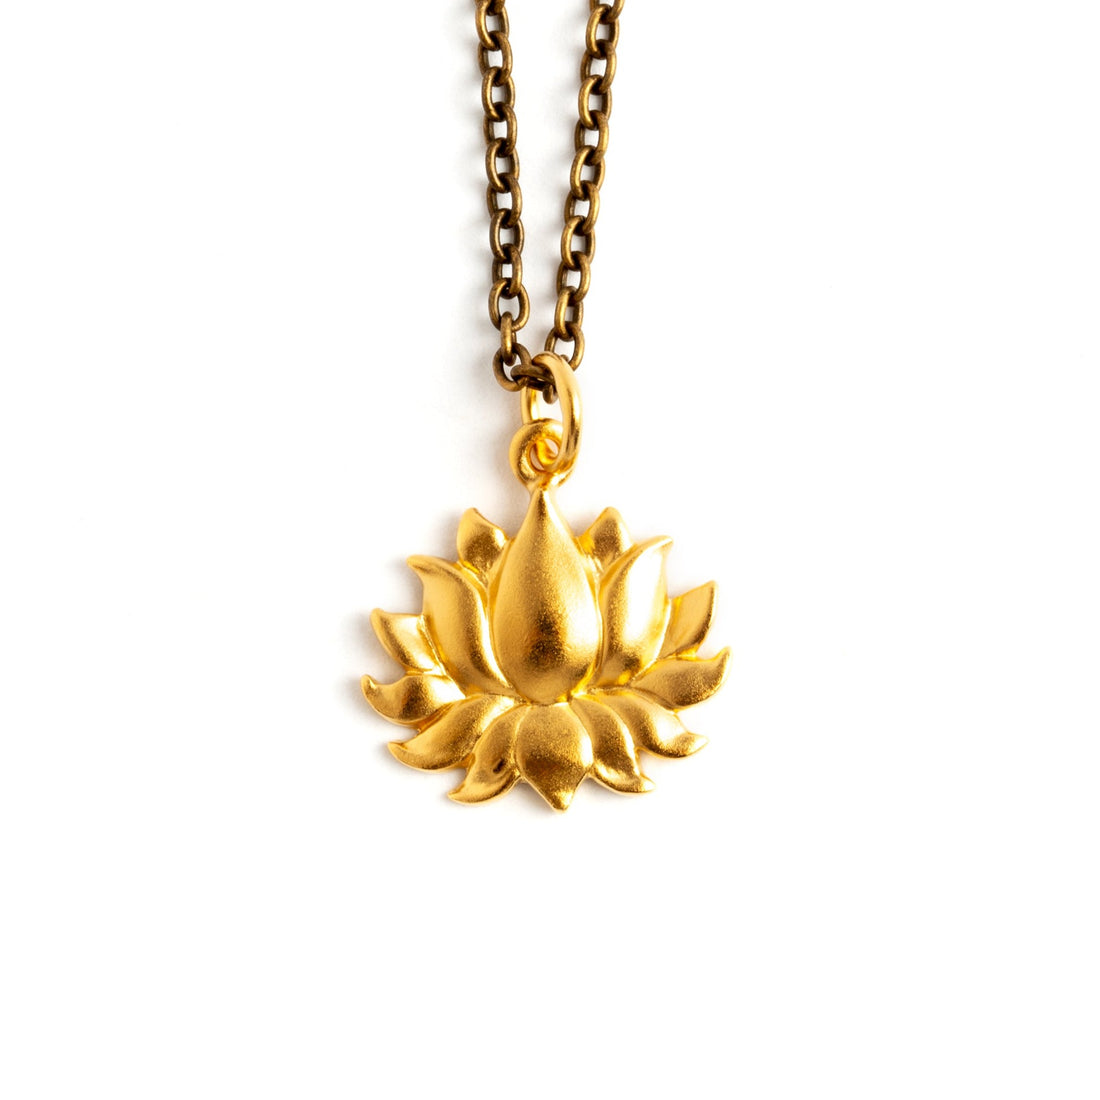 Petite Gold Lotus Charm necklace frontal view